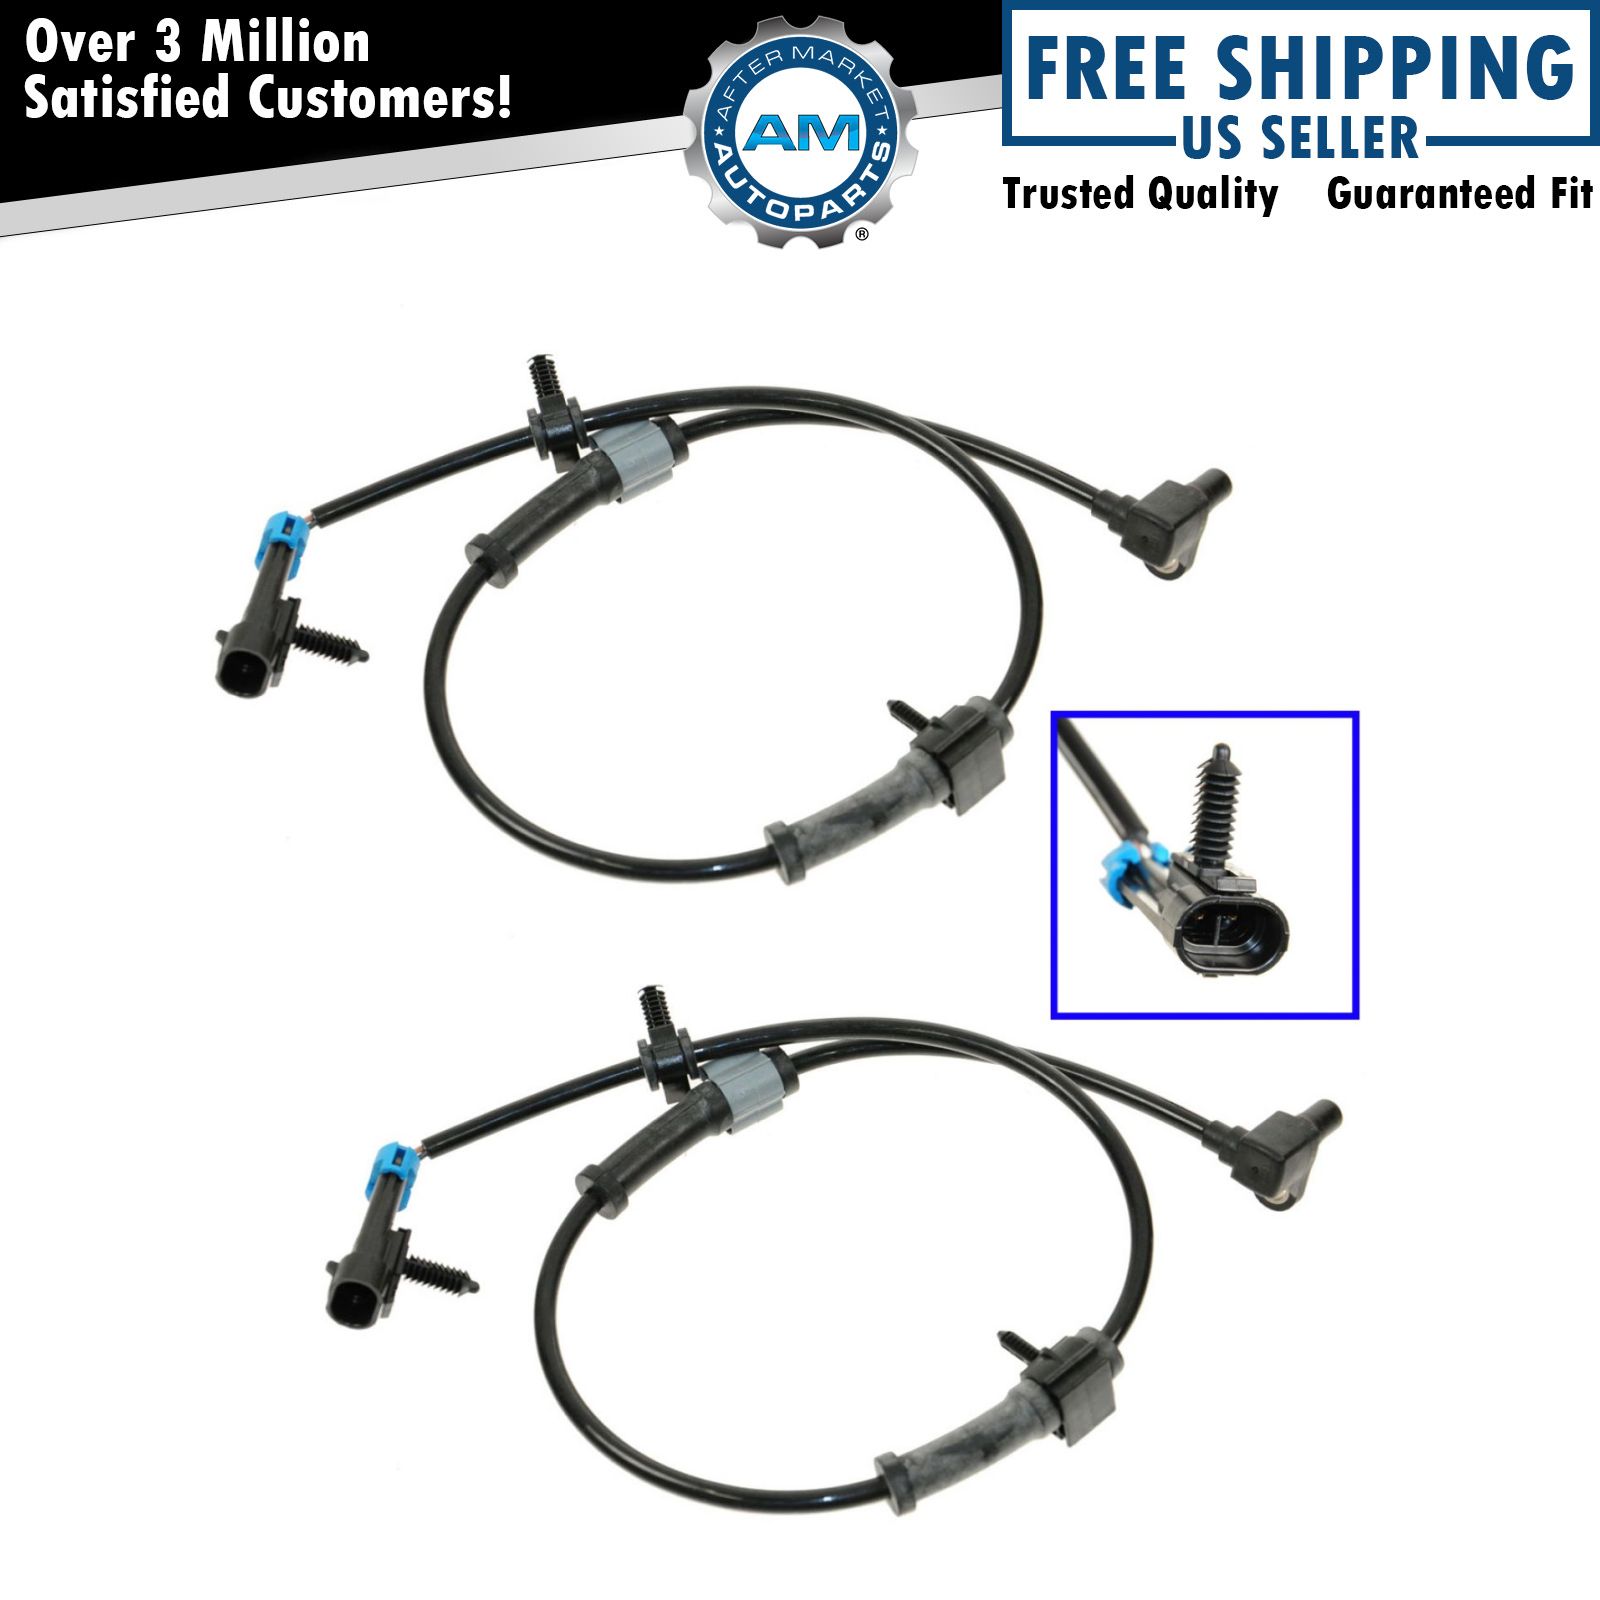 Front ABS Speed Sensor Pair Set of 2 for Silverado Sierra Pickup Truck Avalanche